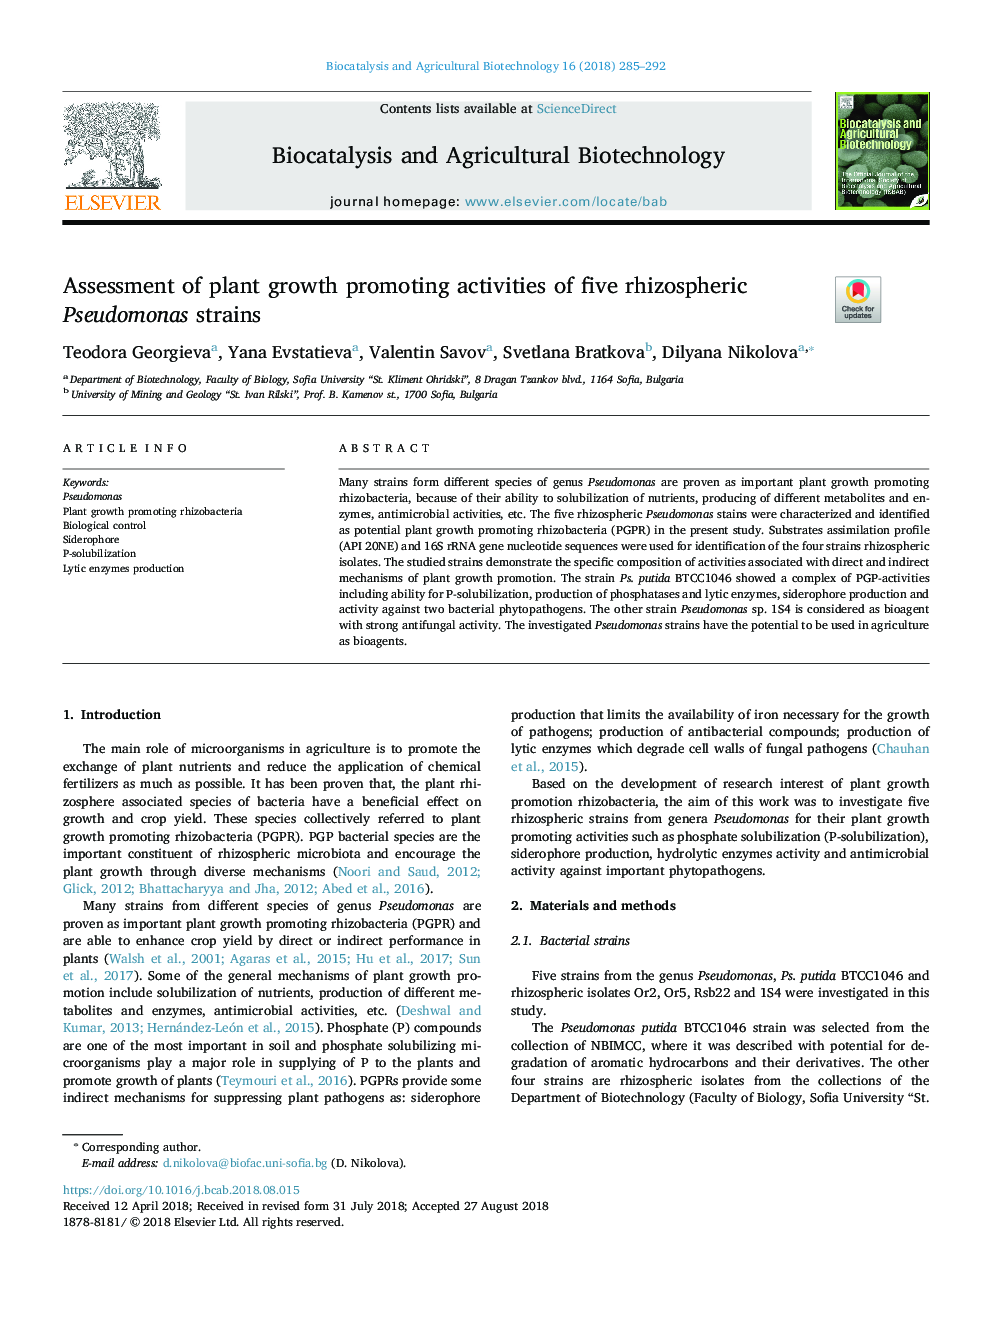 Assessment of plant growth promoting activities of five rhizospheric Pseudomonas strains